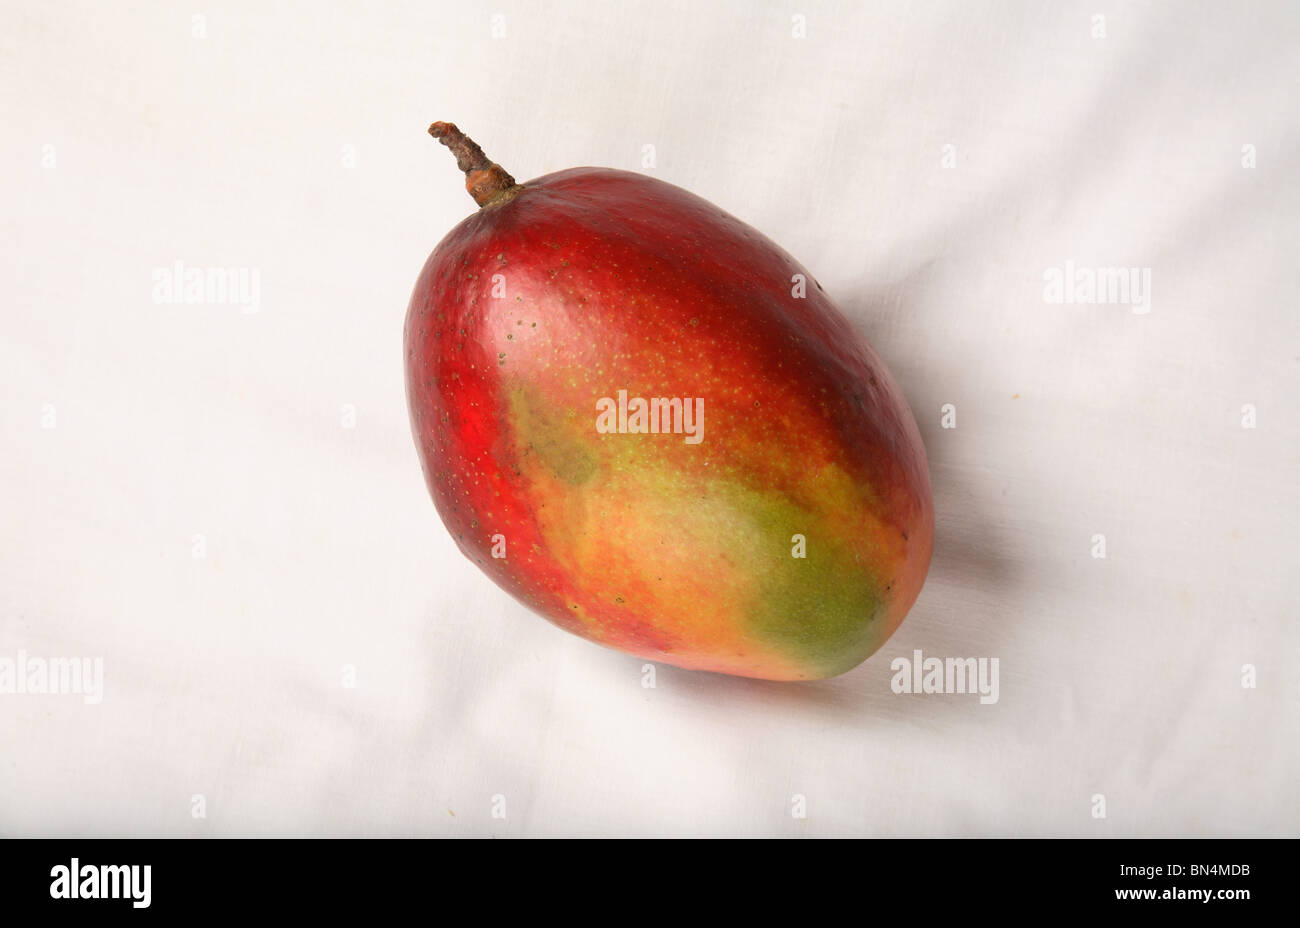 Fruit ; Red Mangos ; Sweet ; Sour test ; Colourful ; One mango in a plate ; India Stock Photo